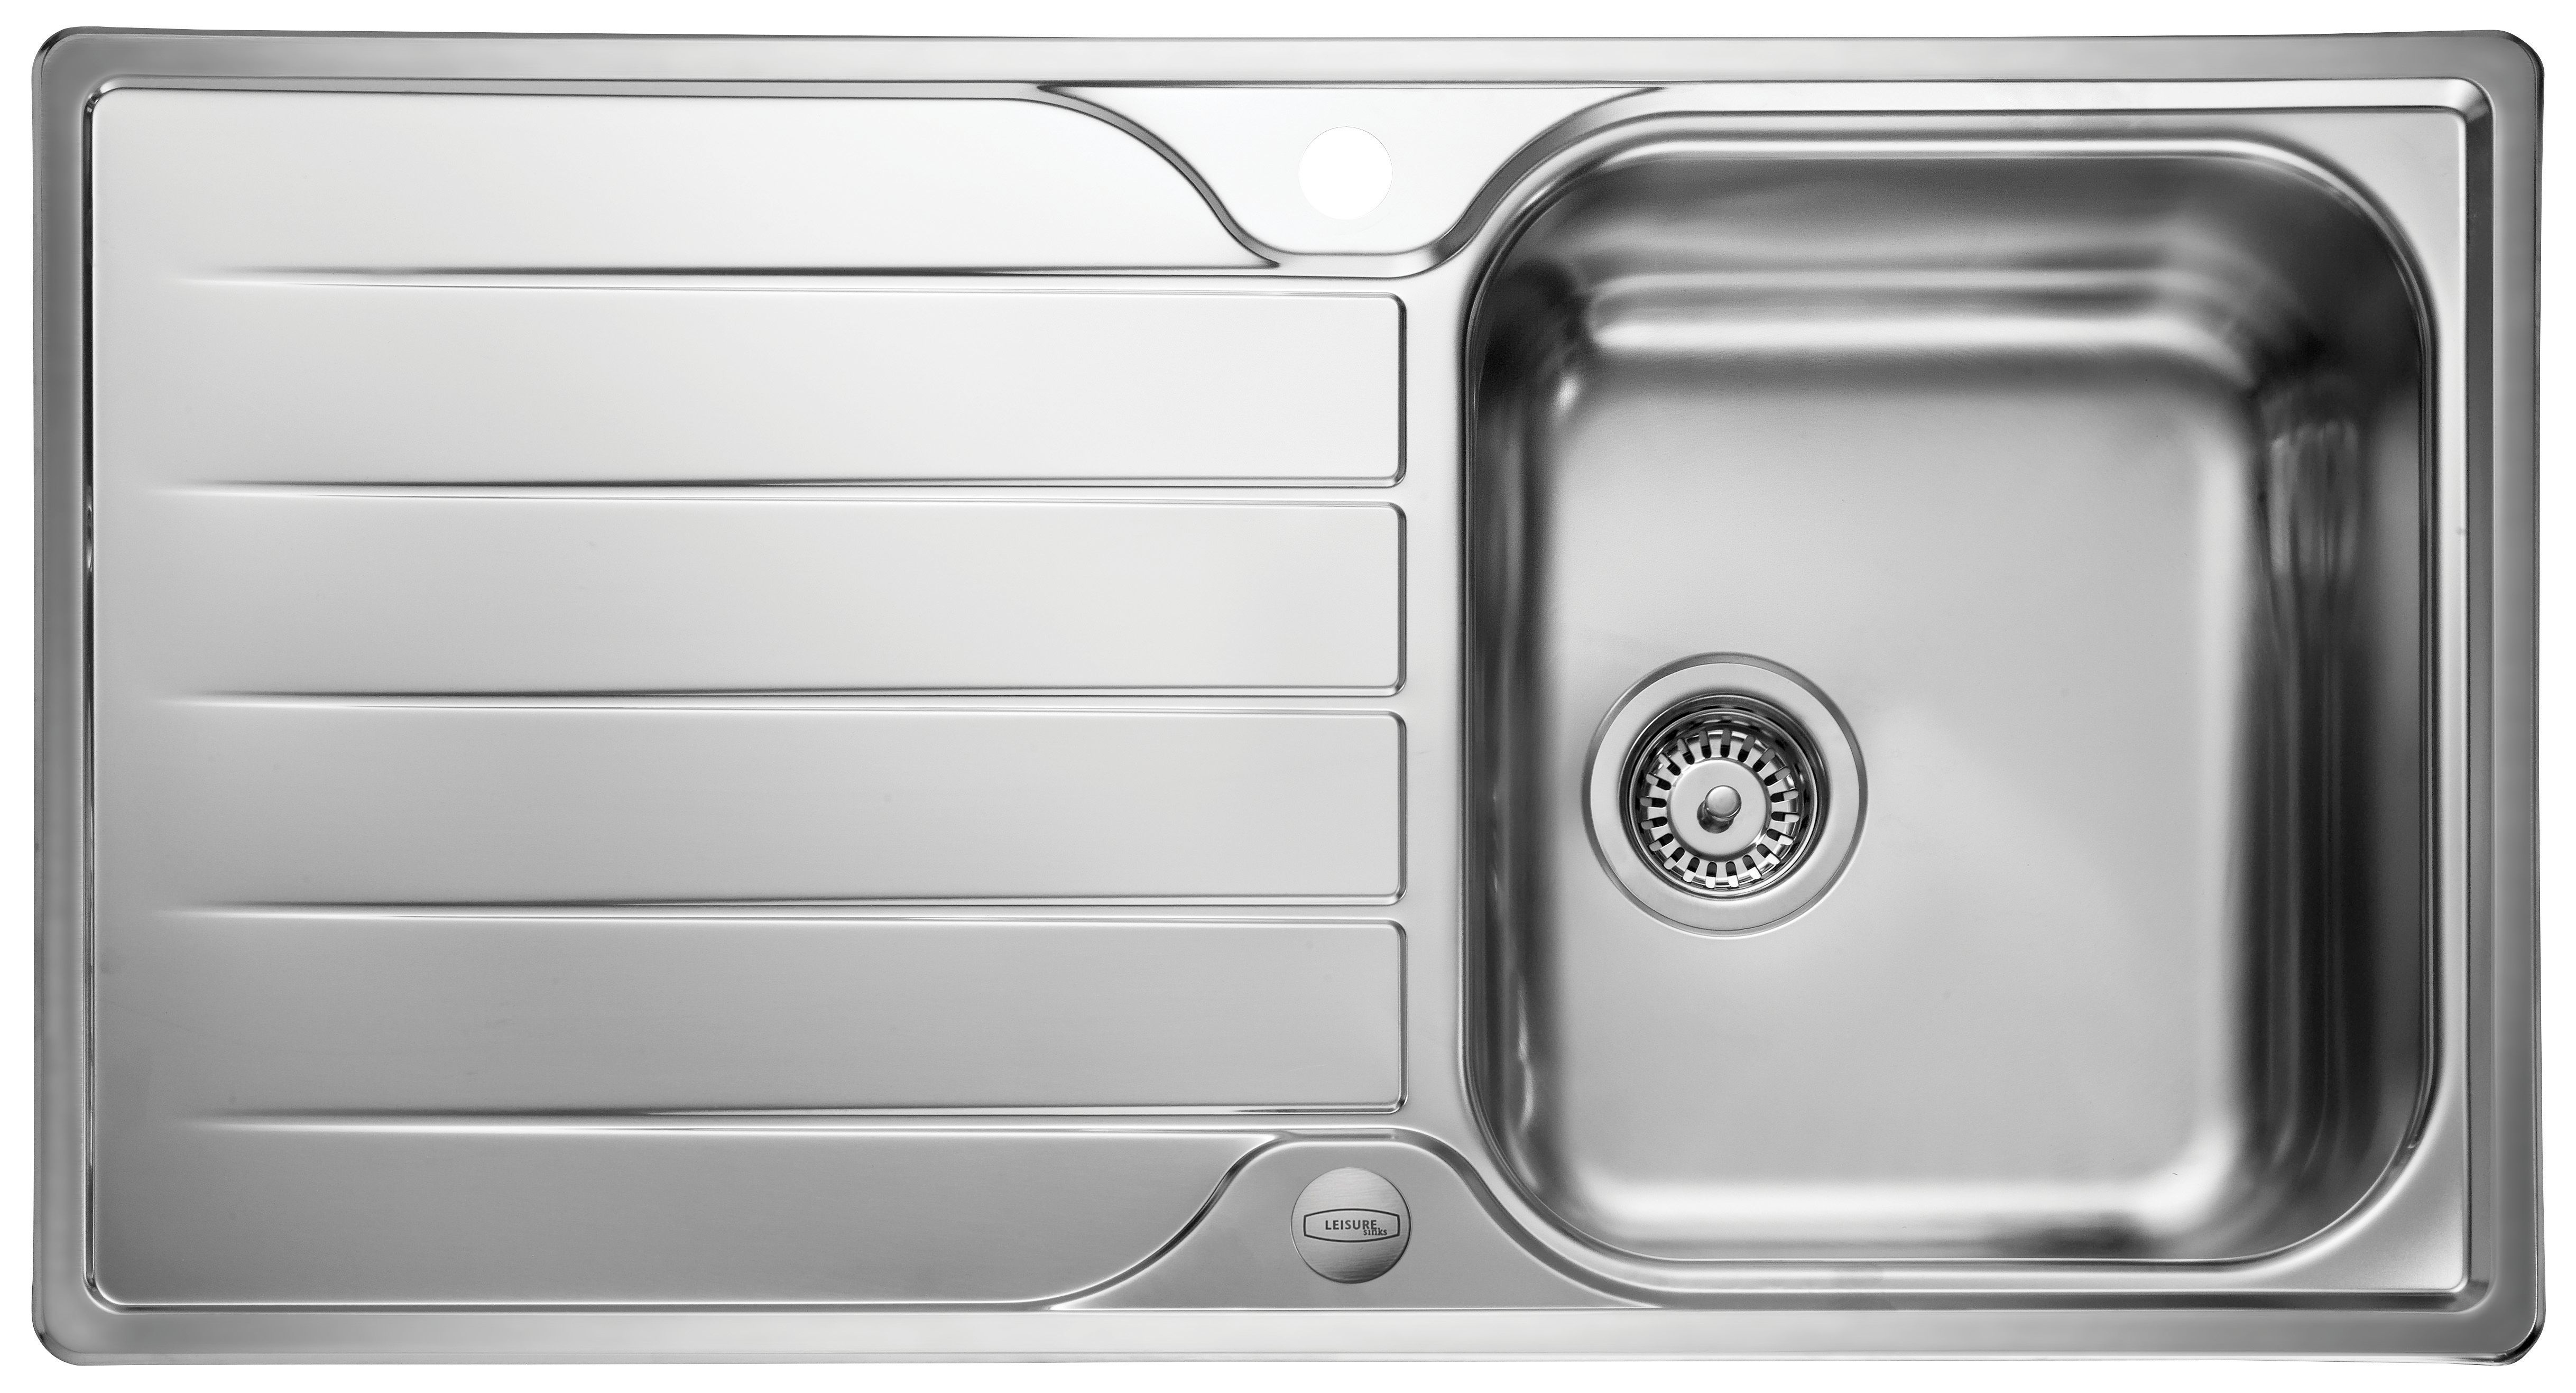 Leisure Albion 1 Bowl Reversible Inset Stainless Steel Kitchen Sink